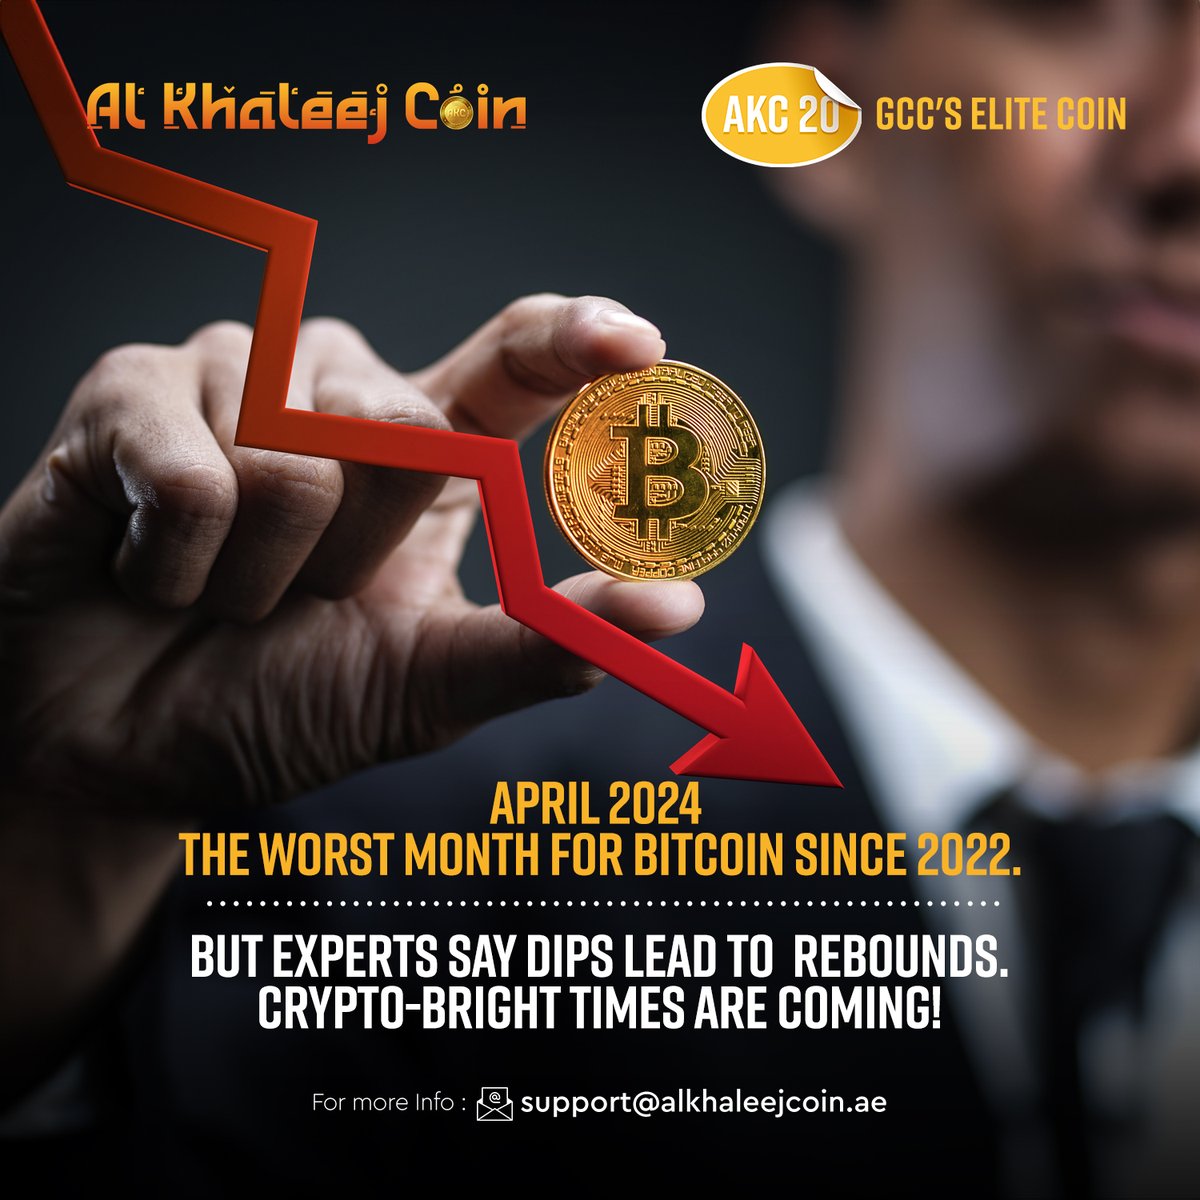 Is April 2024 the worst month for Bitcoin since 2022?
Despite recent challenges, experts reassure us that downturns often precede upswings in the crypto market. So, are brighter days ahead? Yes🔥 📉➡️📈 #Bitcoin #Crypto #akc #alkhaleejcoin #gcccoin #elitecoin #Cryptocurency